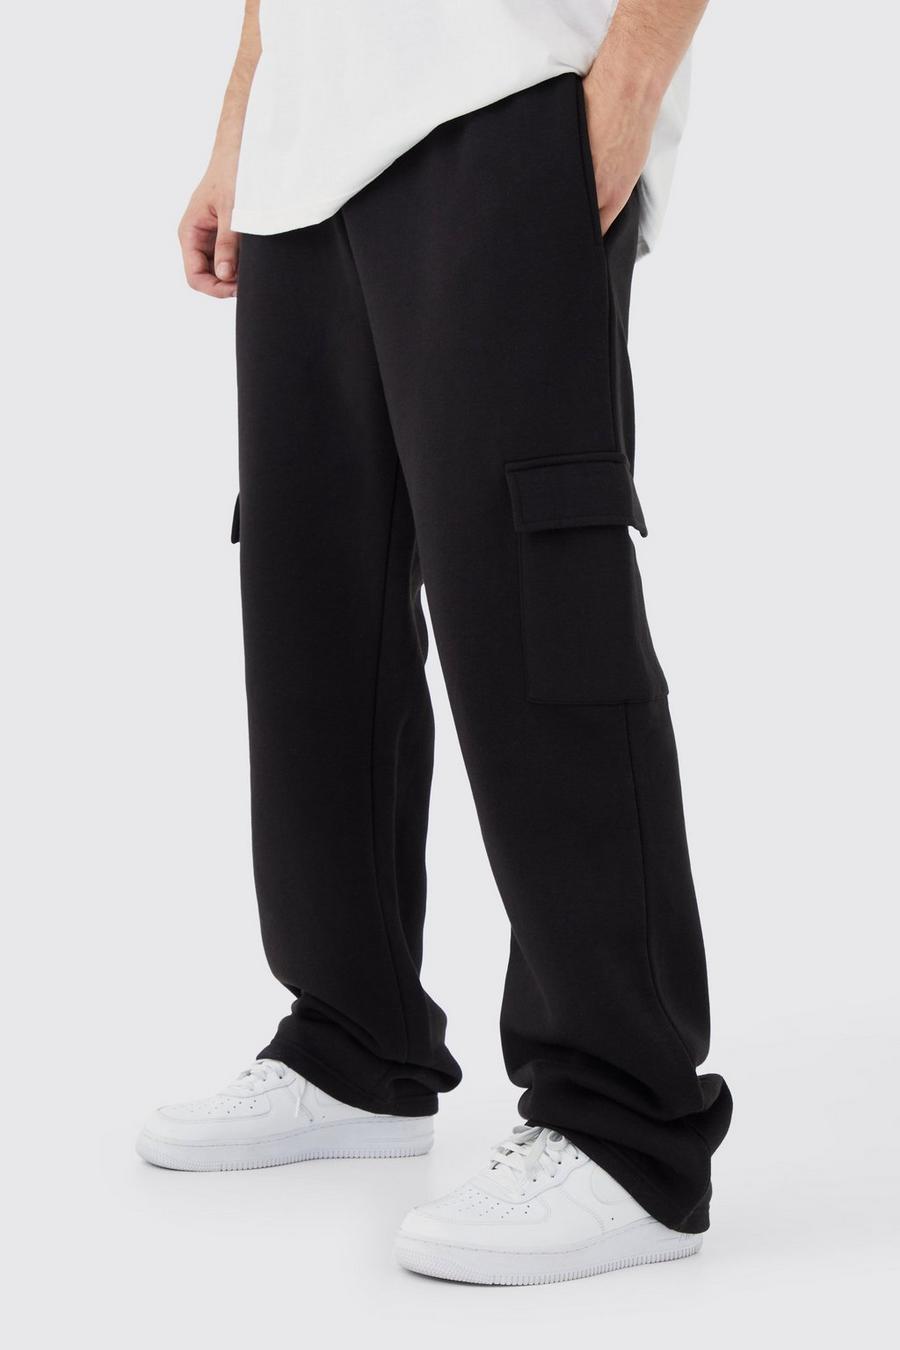 Black Tall Relaxed Fit Cargo Sweatpant